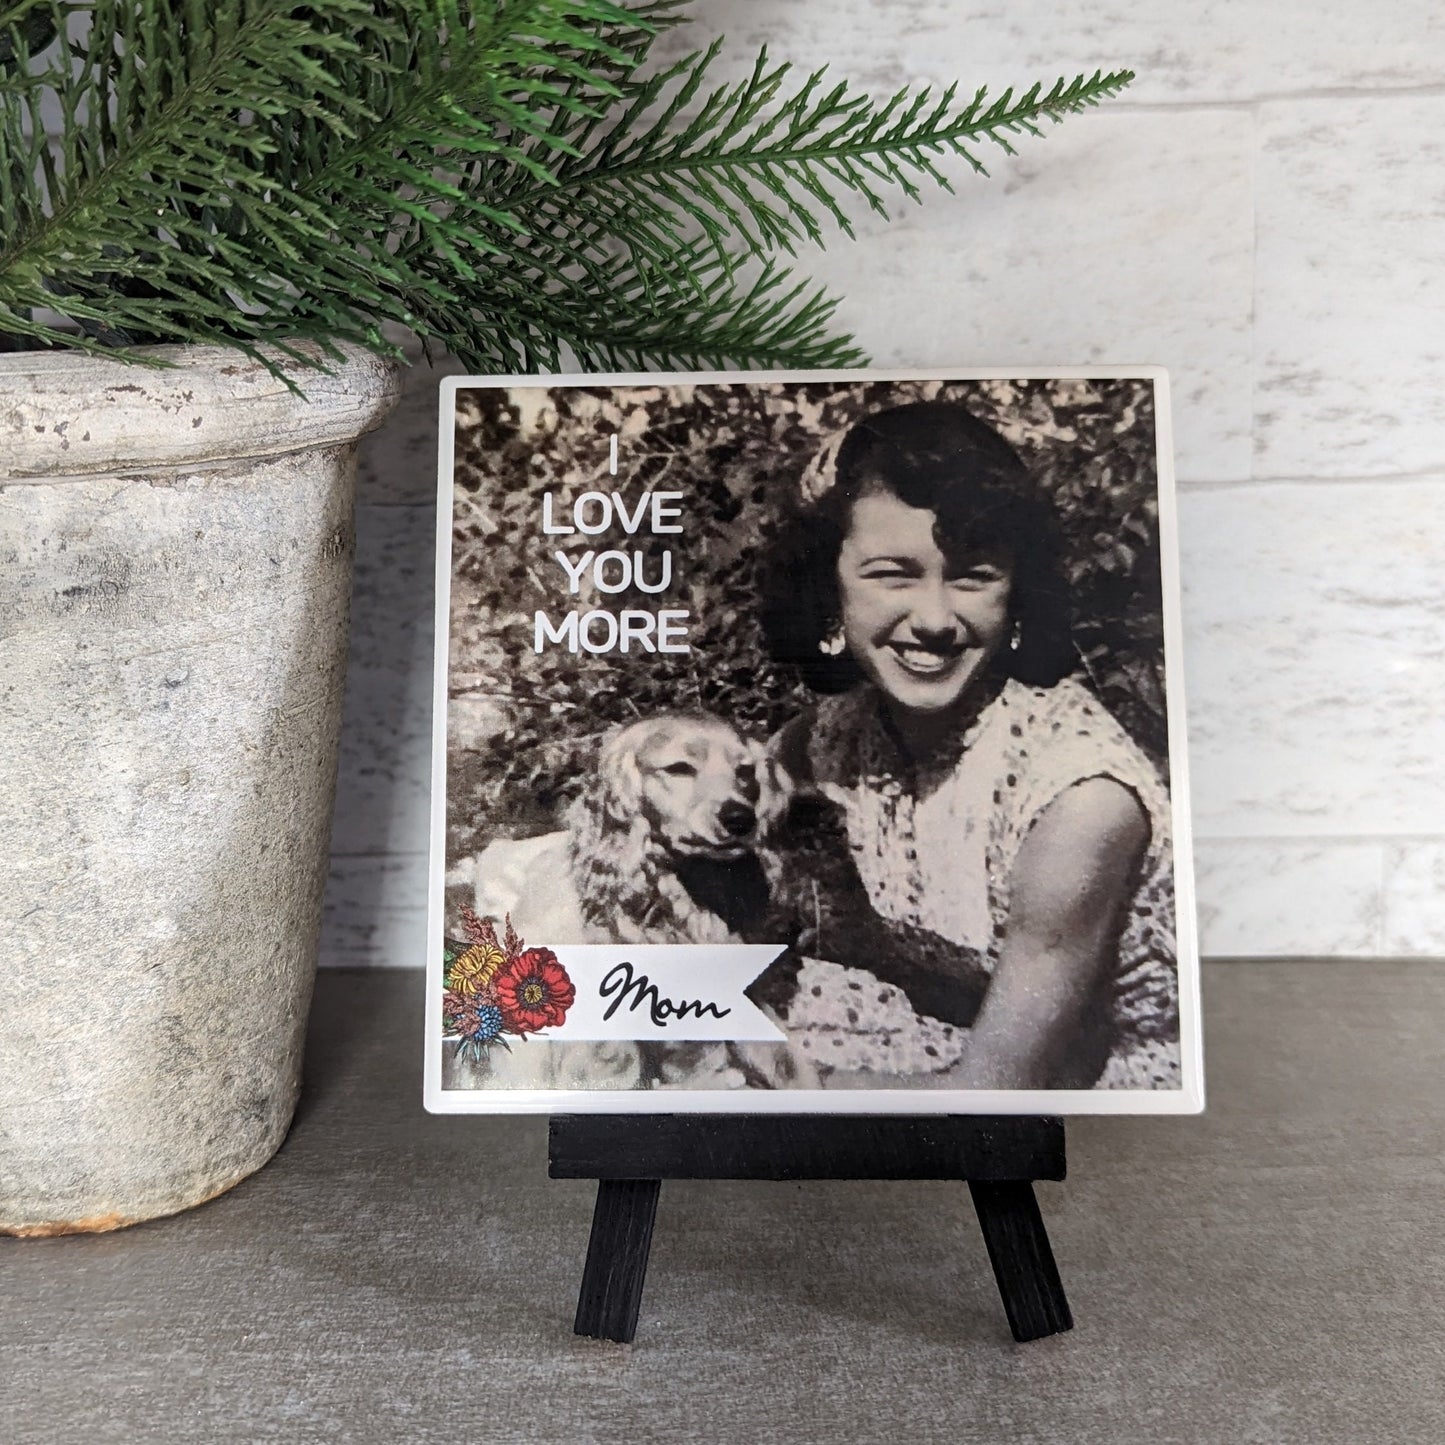 Custom I love you more Tile, Dad, loved one easel sign, photo tile - easel included, your image choice